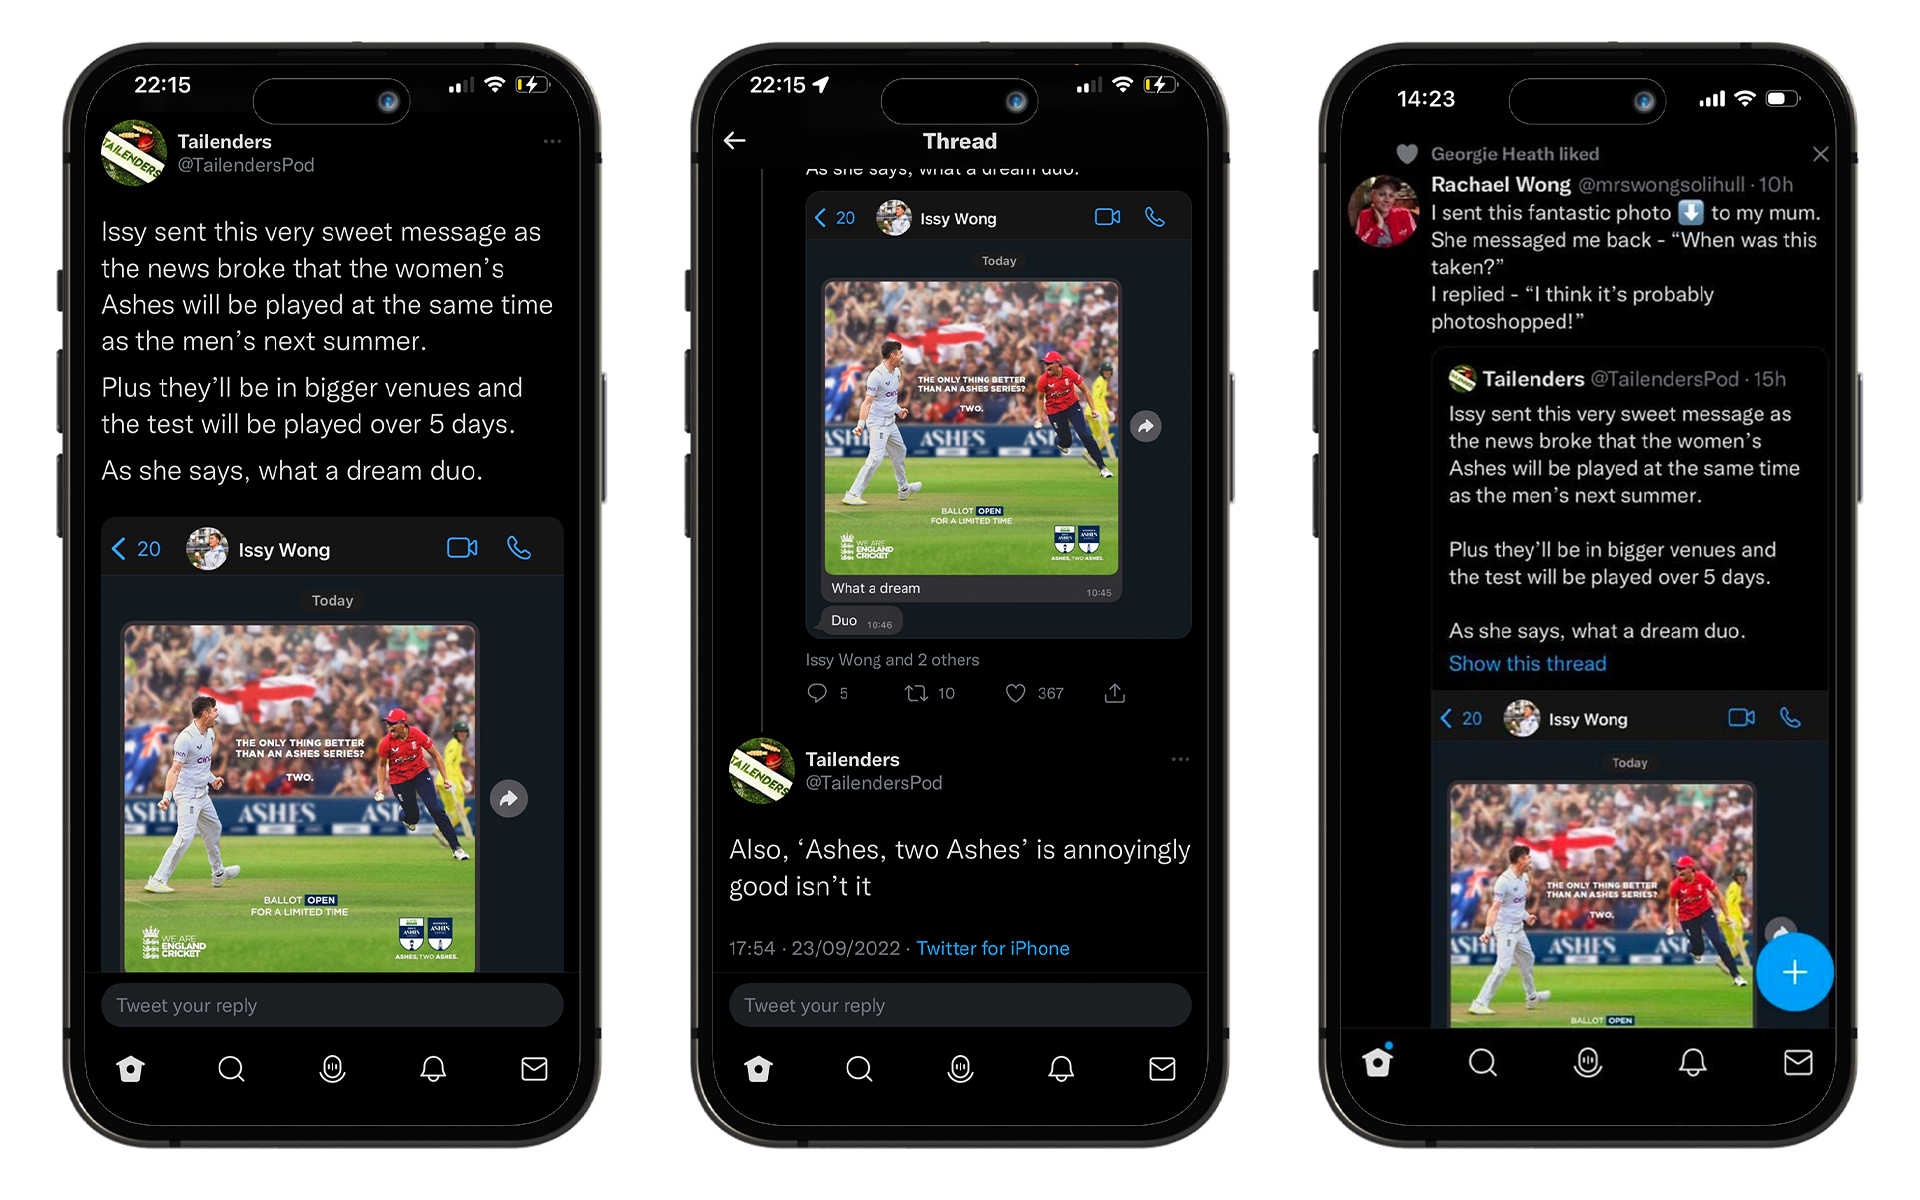 Phone mockups showing social media reactions to the Ashes, Two Ashes campaign